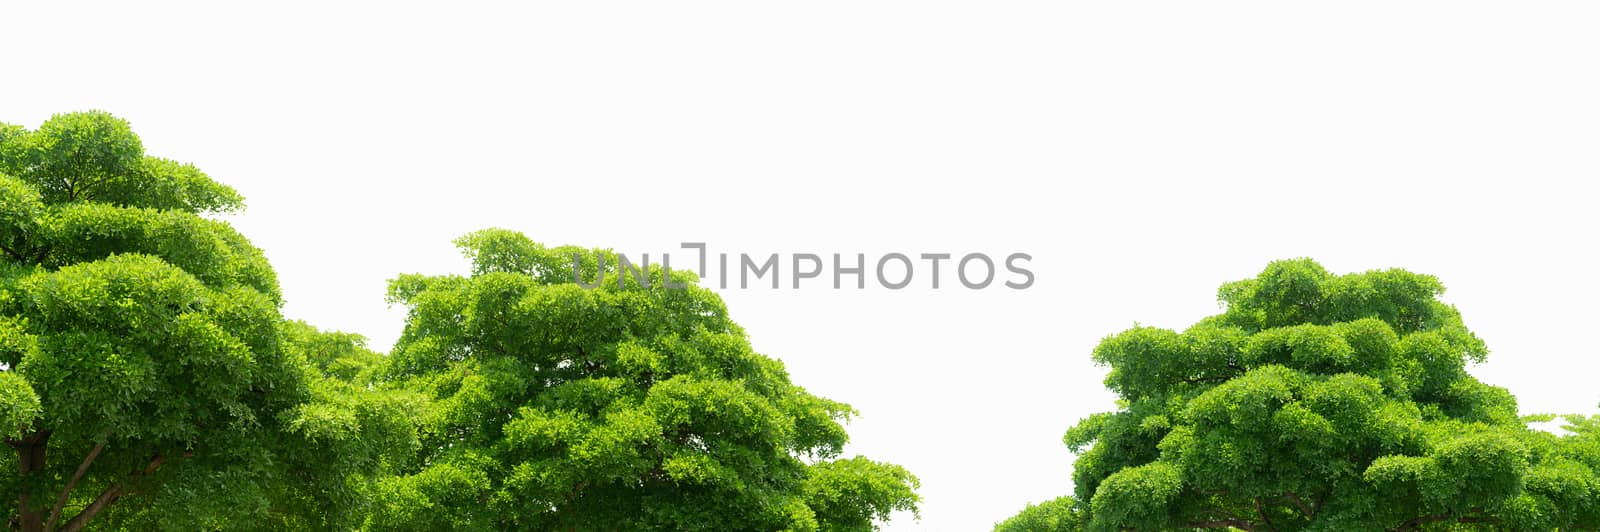 Trees with green leaves isolated on white background. Tree with  by Fahroni